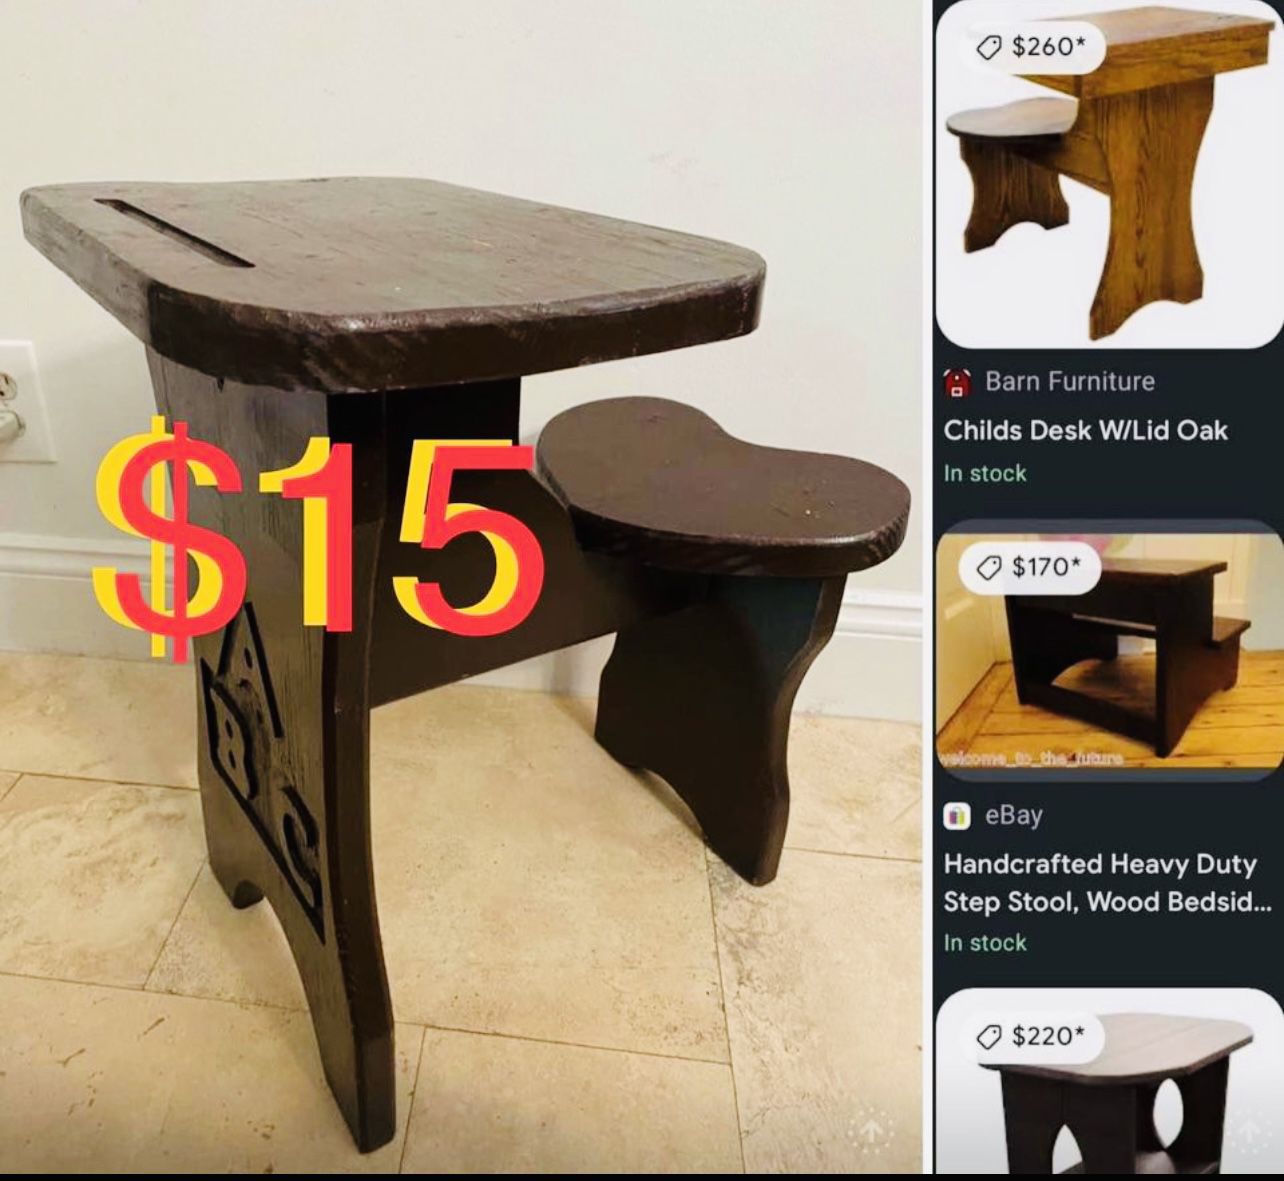 $15 Vintage Hand-Carved Wooden Kid’s desk with Seat,real Solid wood very sturdy can be painted